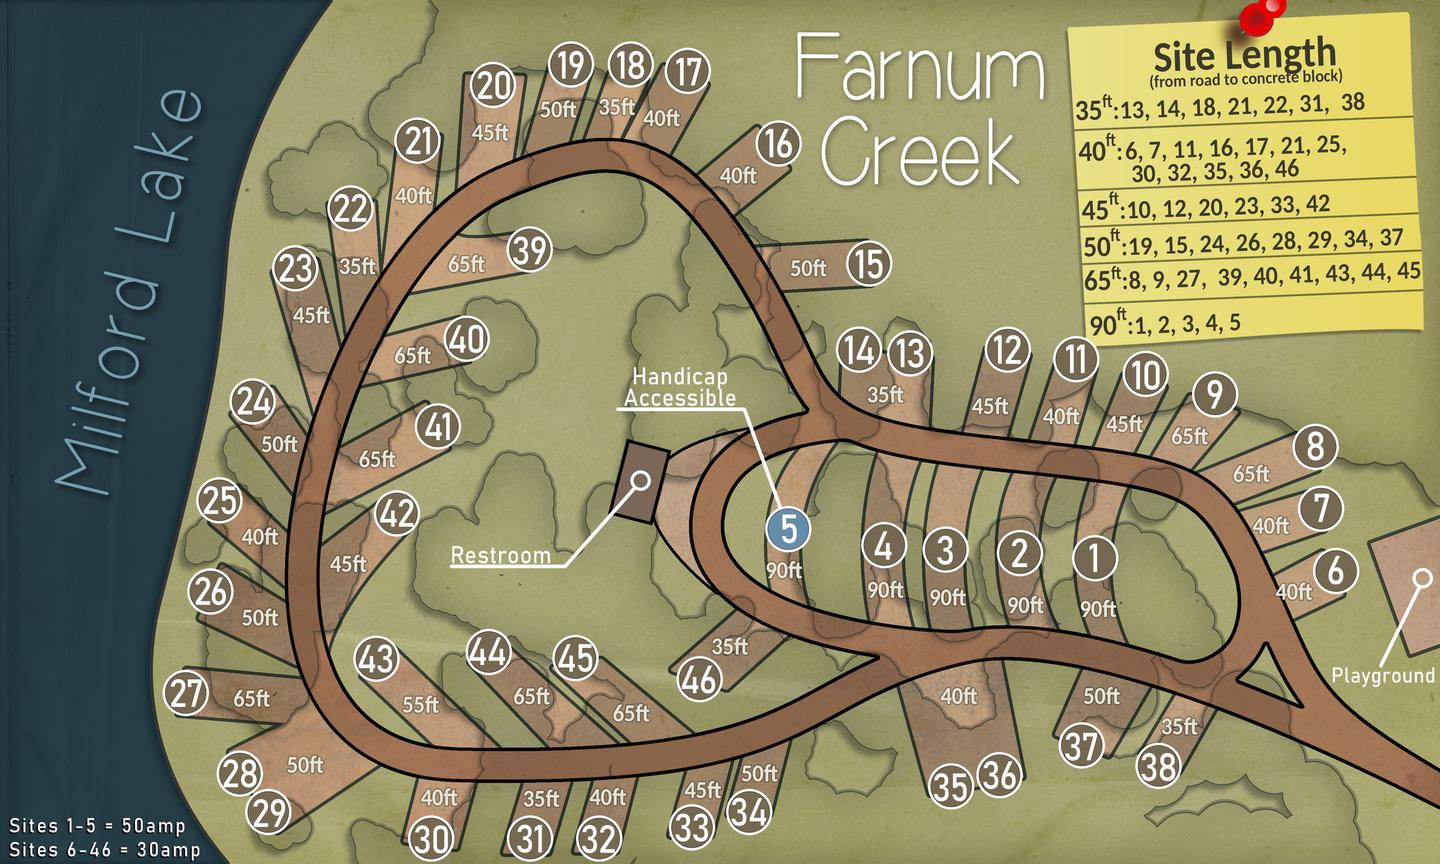 Farnum Creek Digital Campground MapDigital map showing the site location, site length, and approximate shade at Farnum Creek.